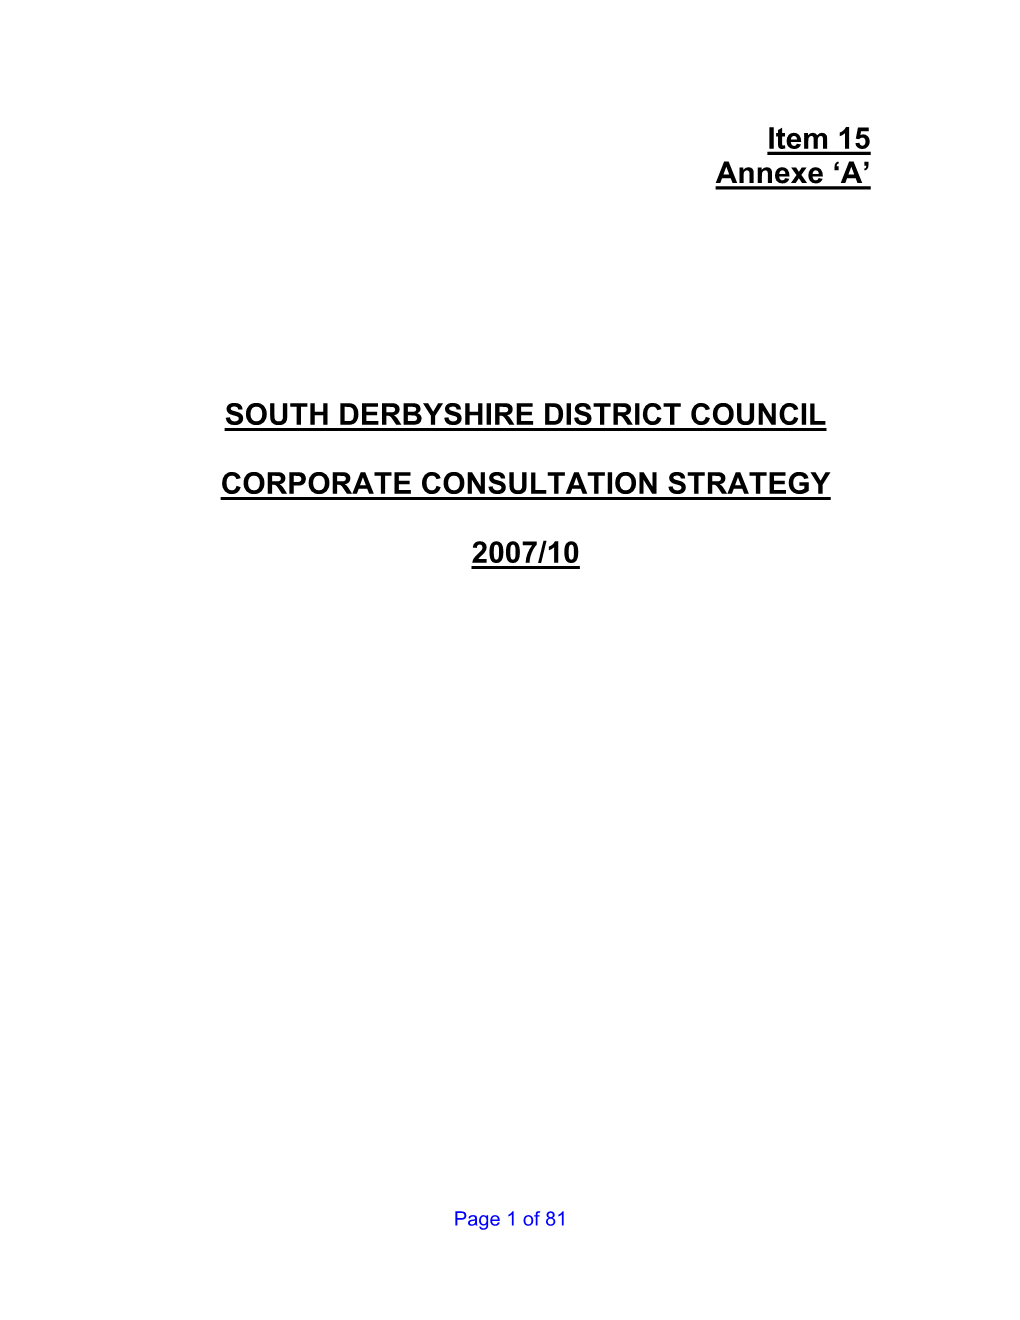 South Derbyshire Council's Draft Consultation Strategy